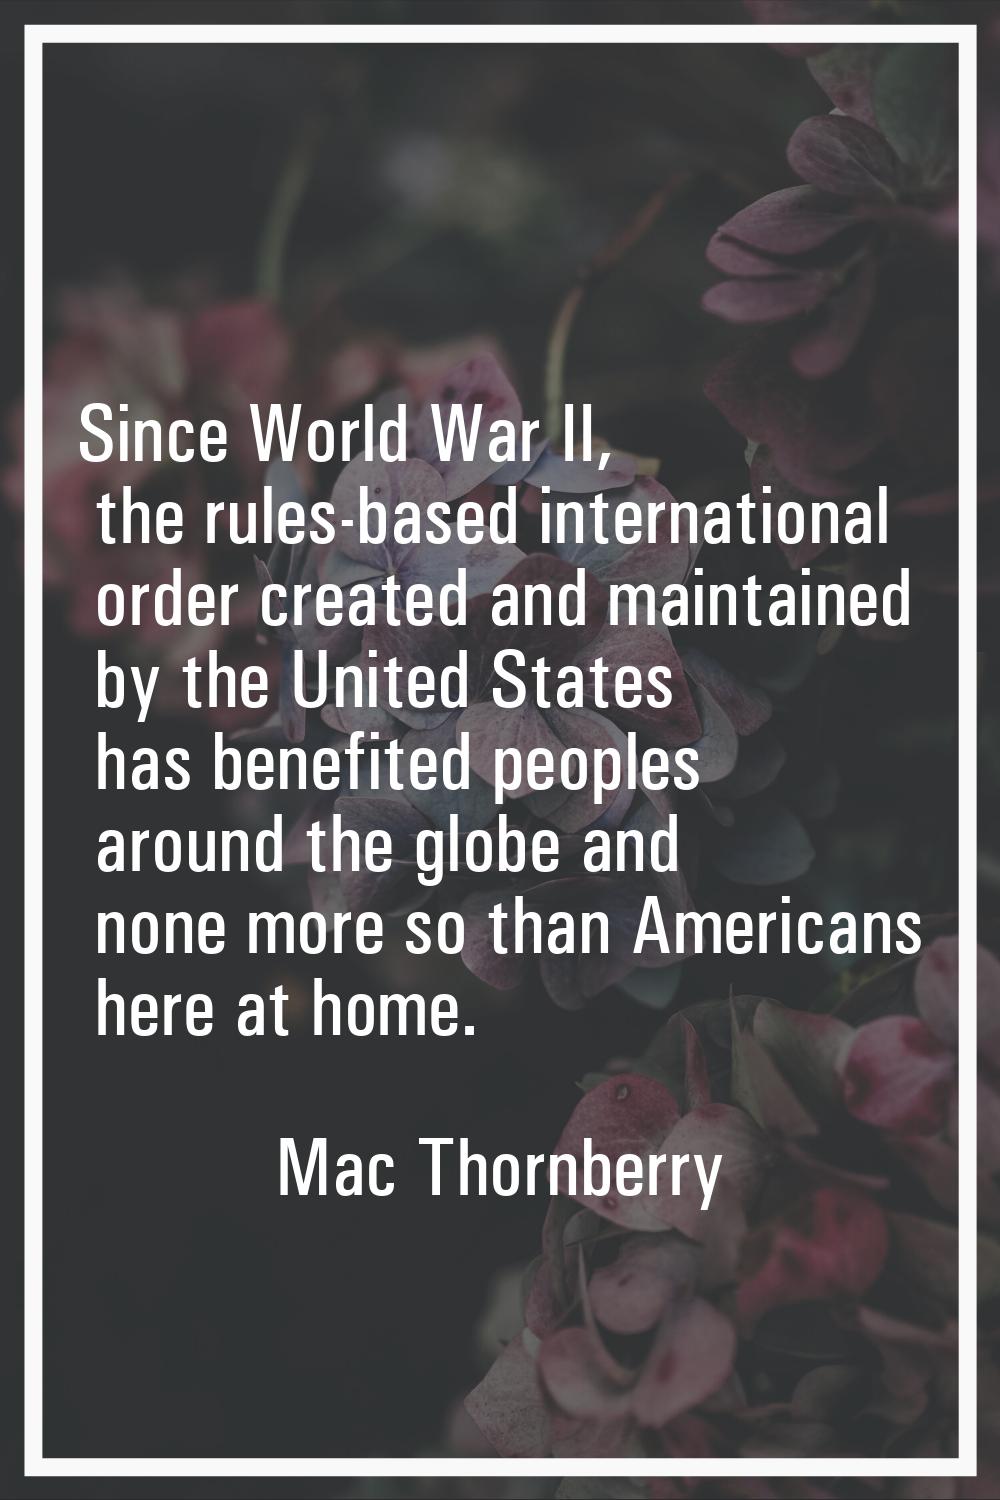 Since World War II, the rules-based international order created and maintained by the United States